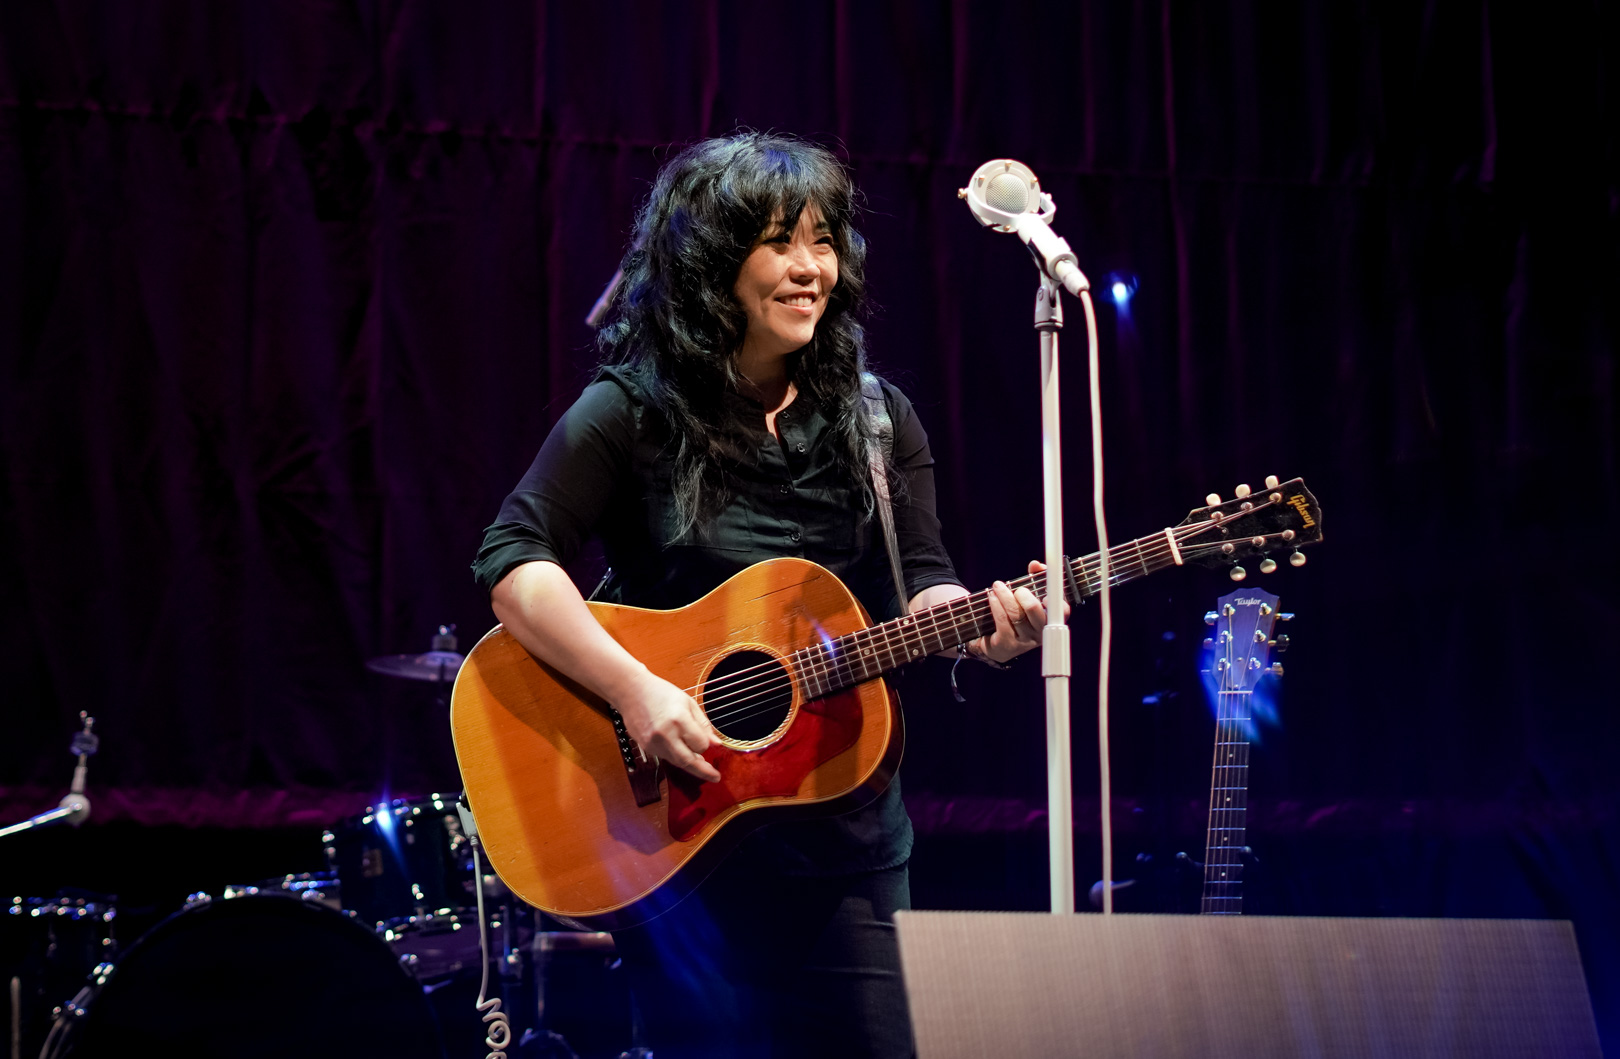 A woman smiles with a guitar on stage